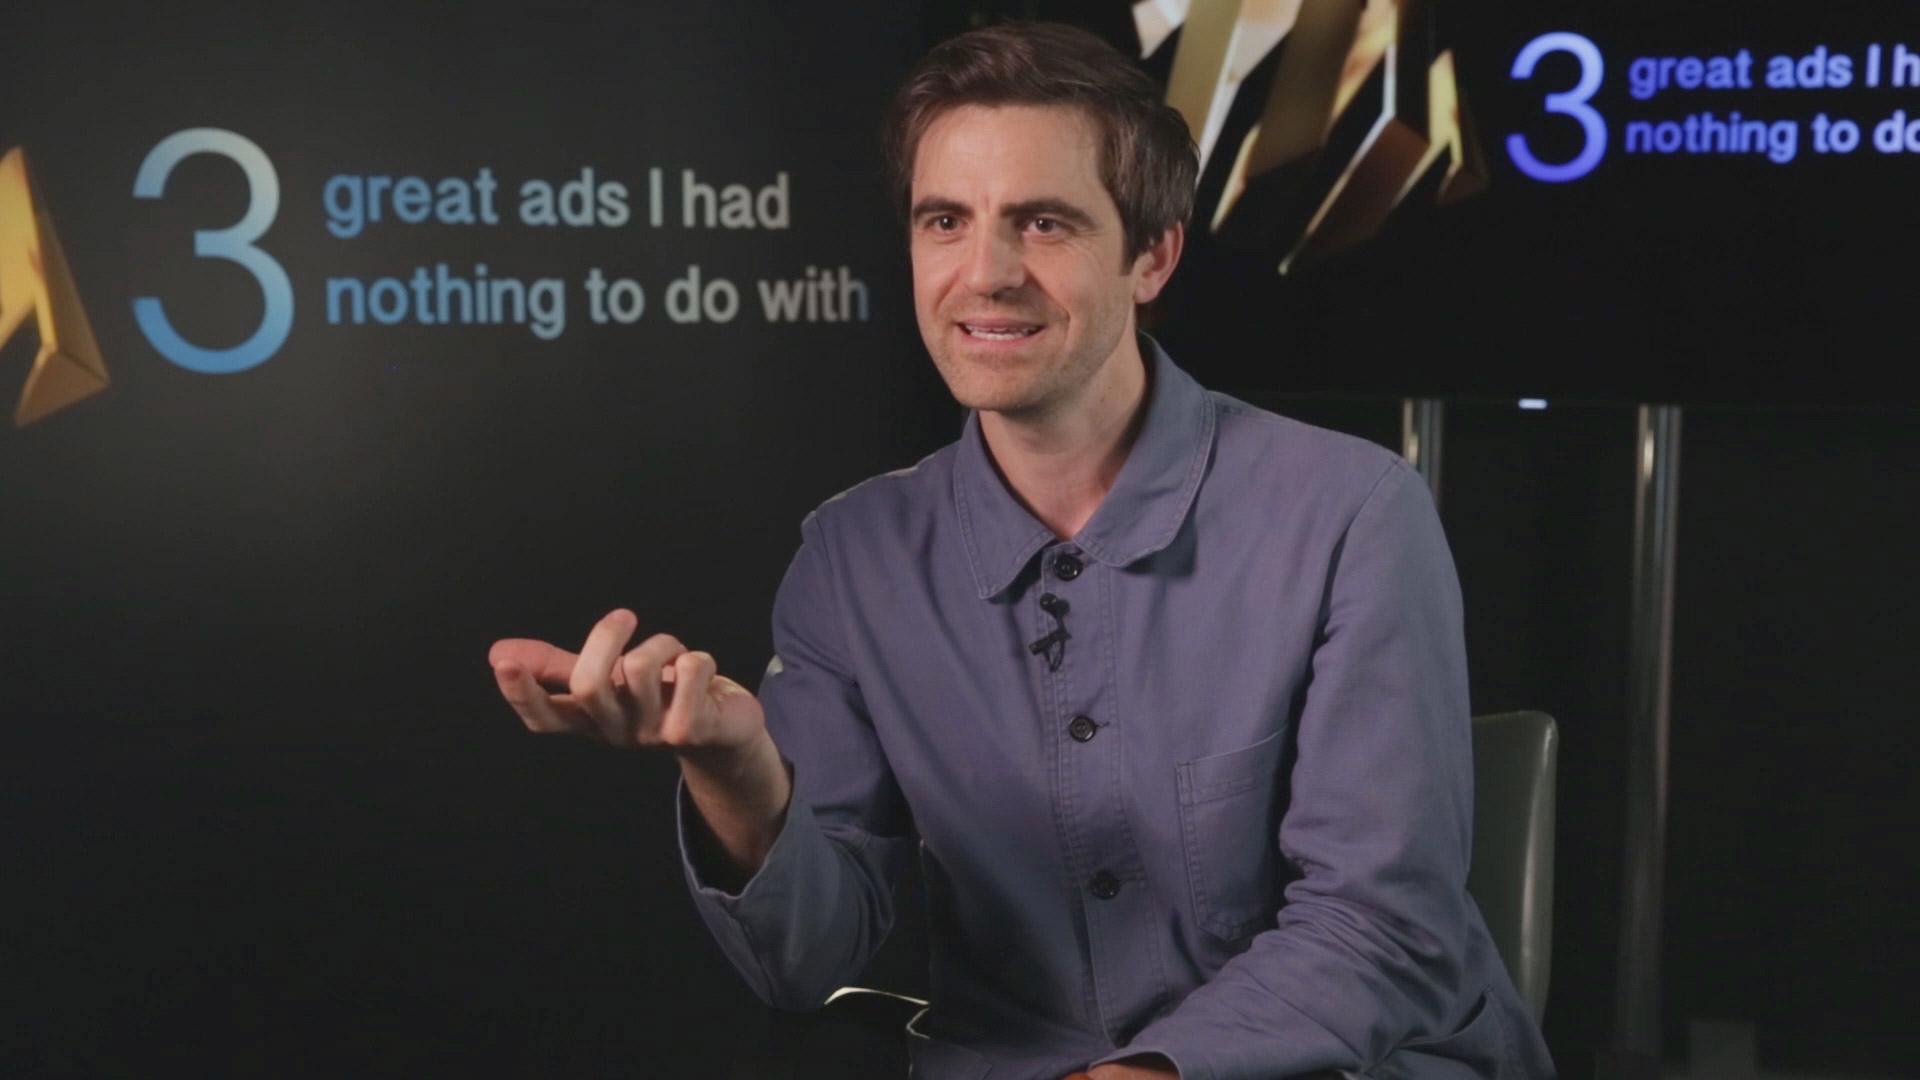 3 great ads I had nothing to do with: Aidan McClure